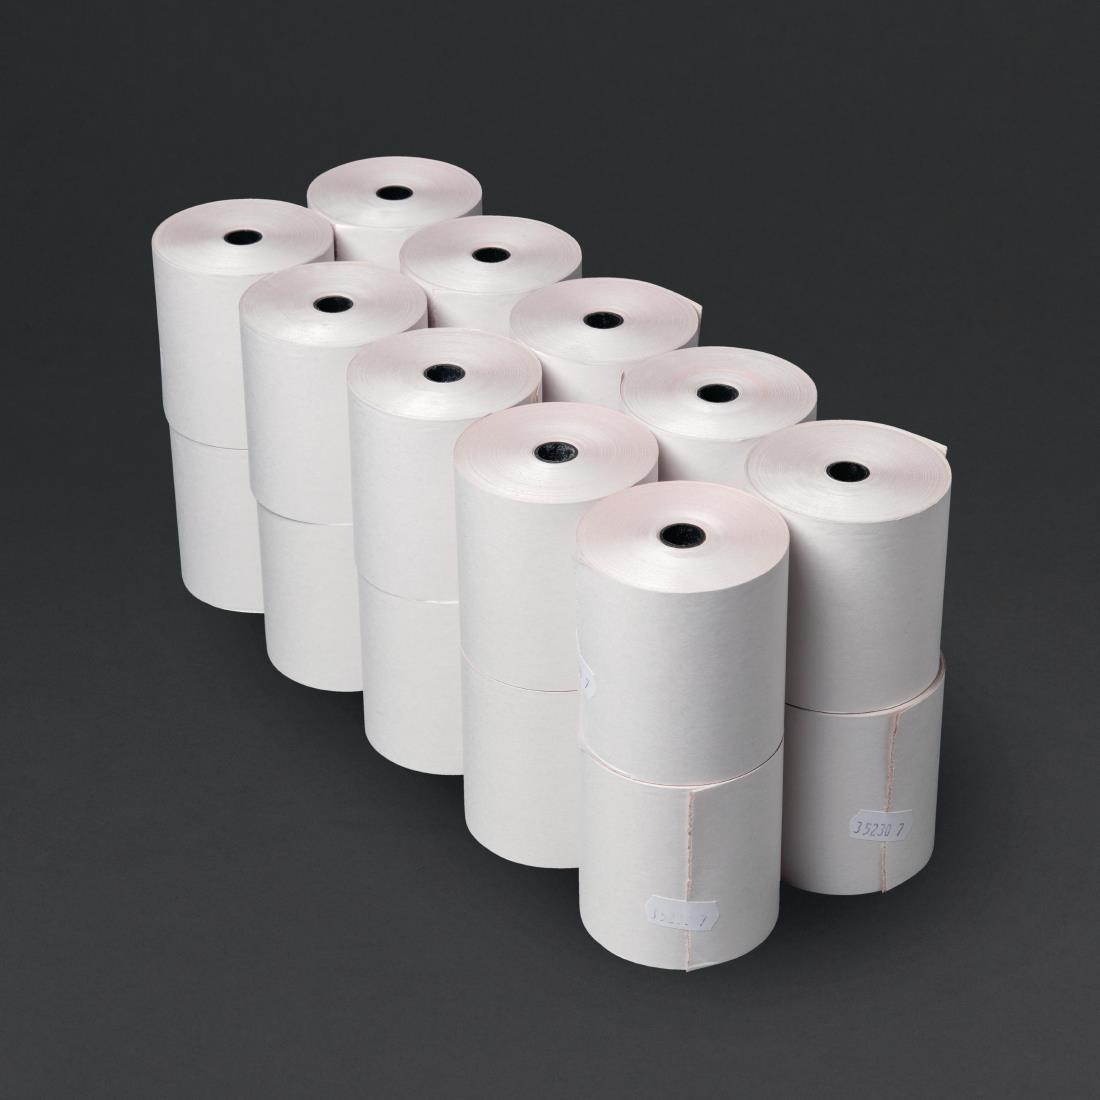 Fiesta Non-Thermal 3ply Till Roll 75 x 70mm (Pack of 20) - DK597  - 1